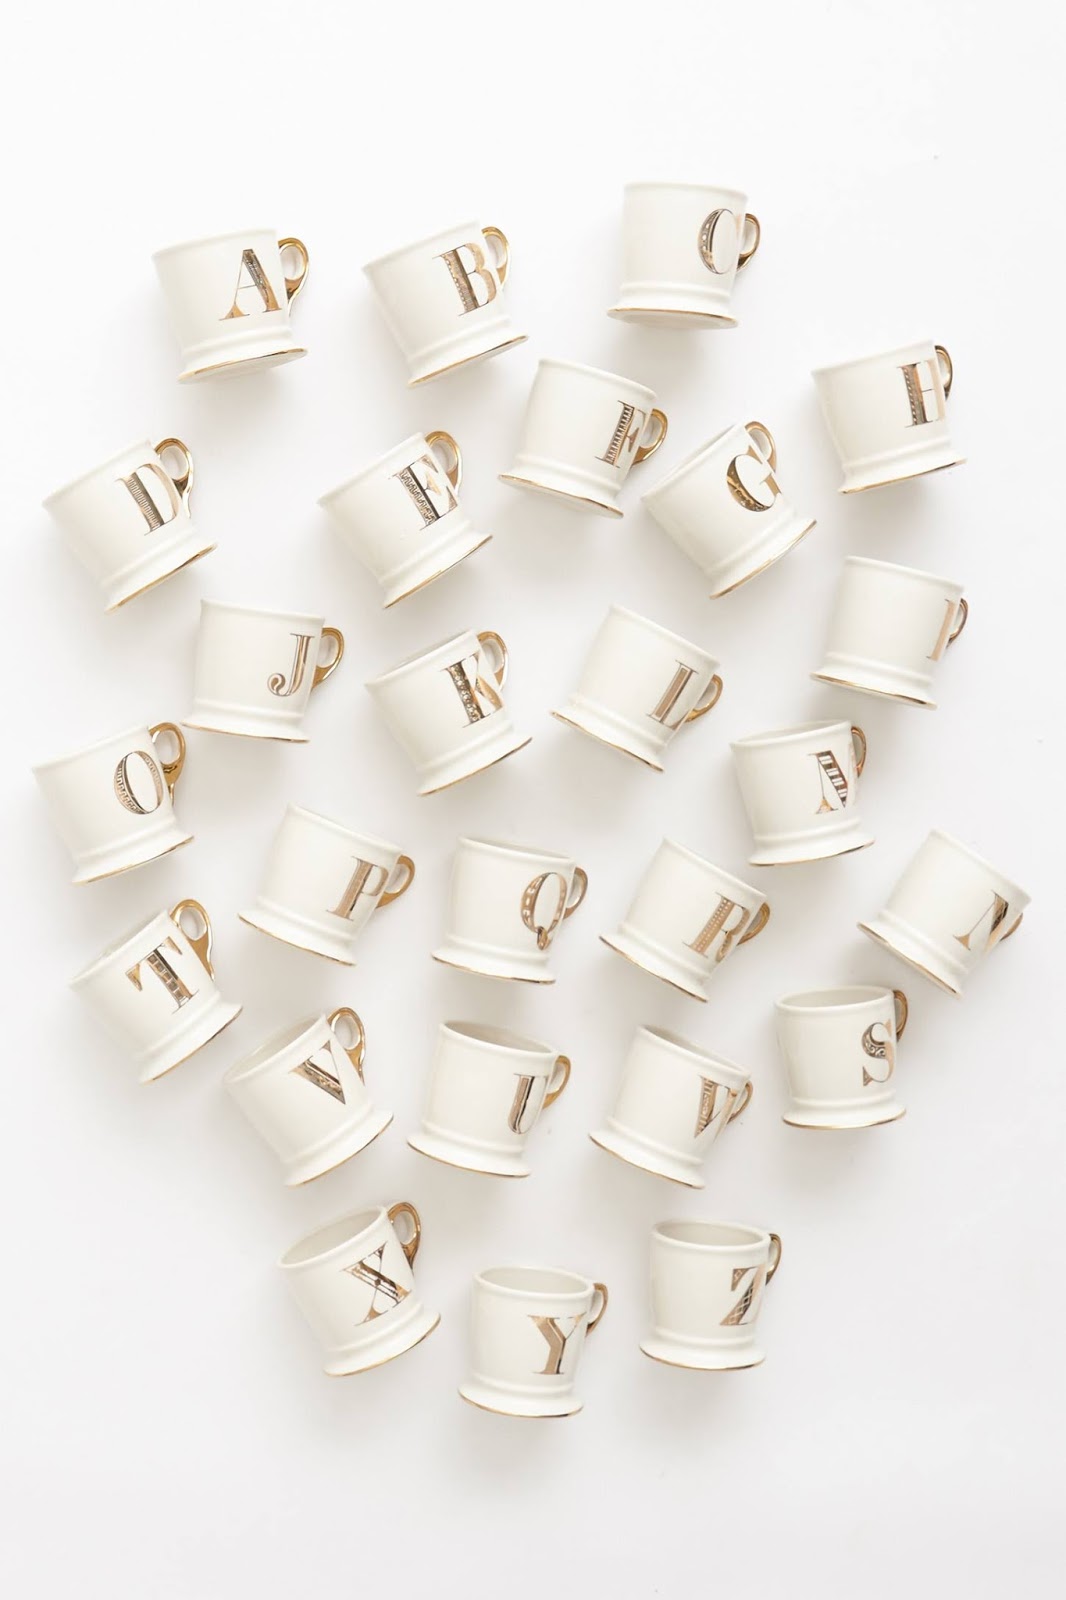 Evening delight: A grabbable gift at Anthropologie, 20% off tonight only!